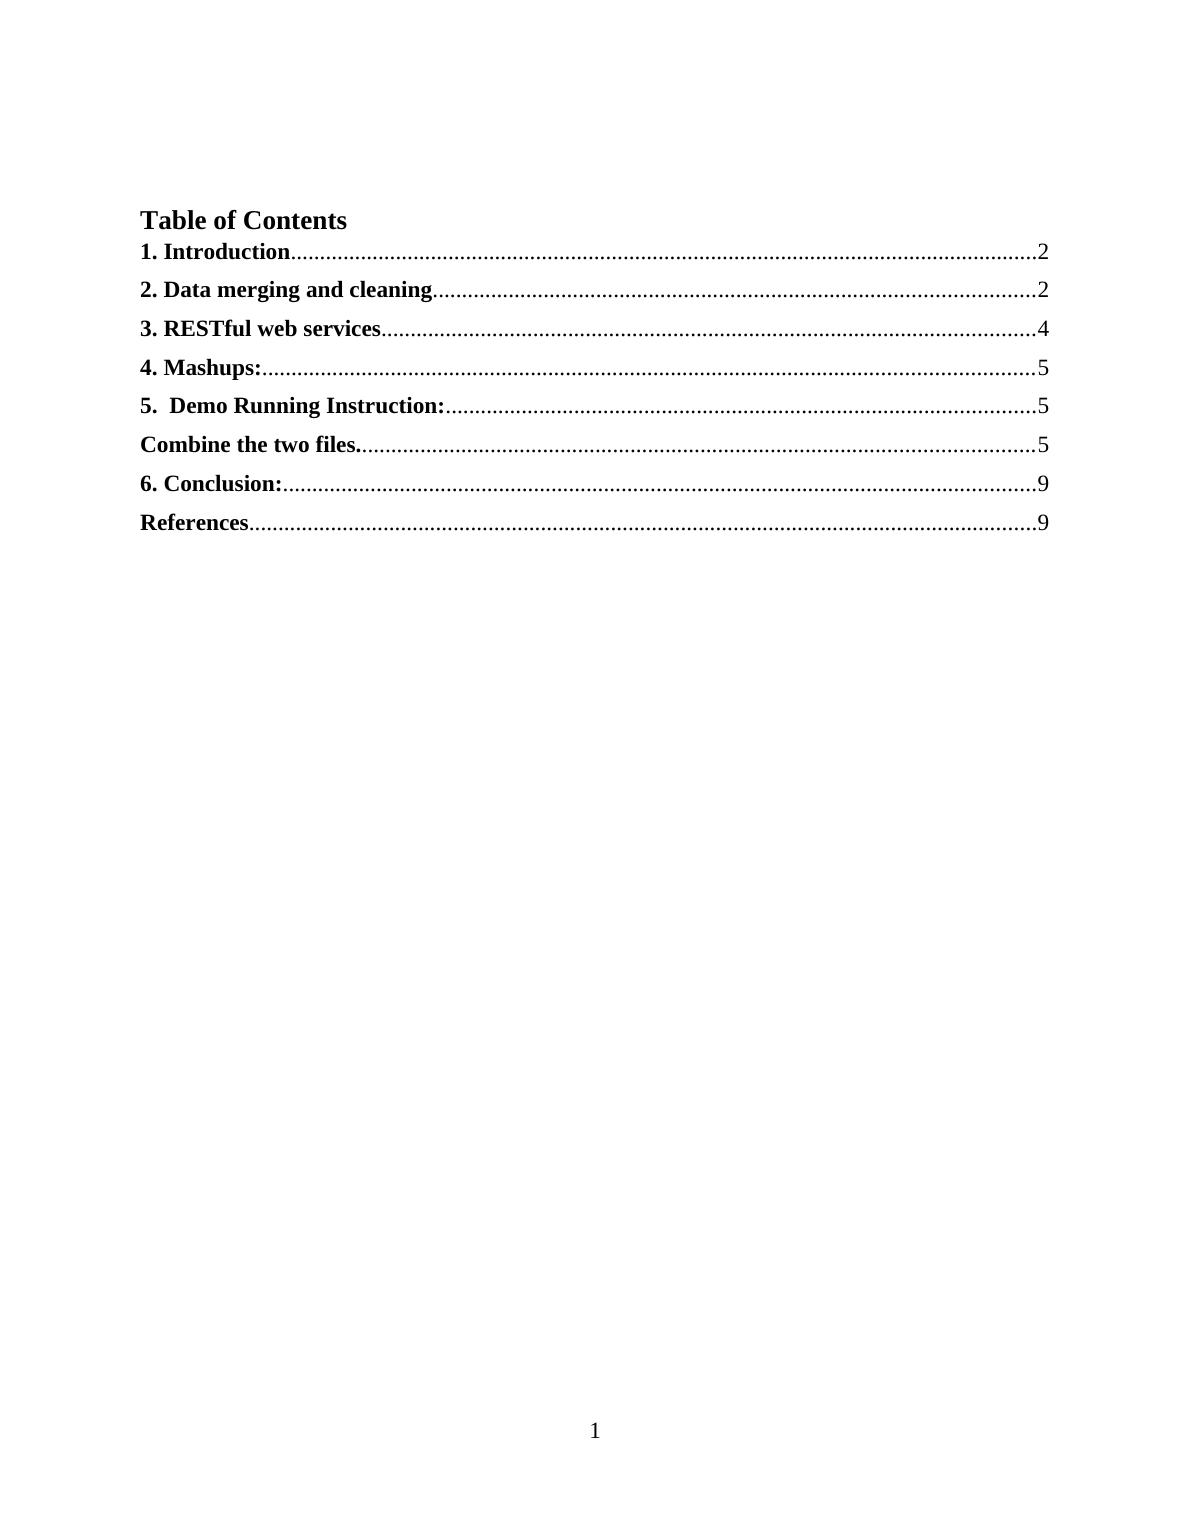 Data merging and Cleaning  Assignment PDF_1